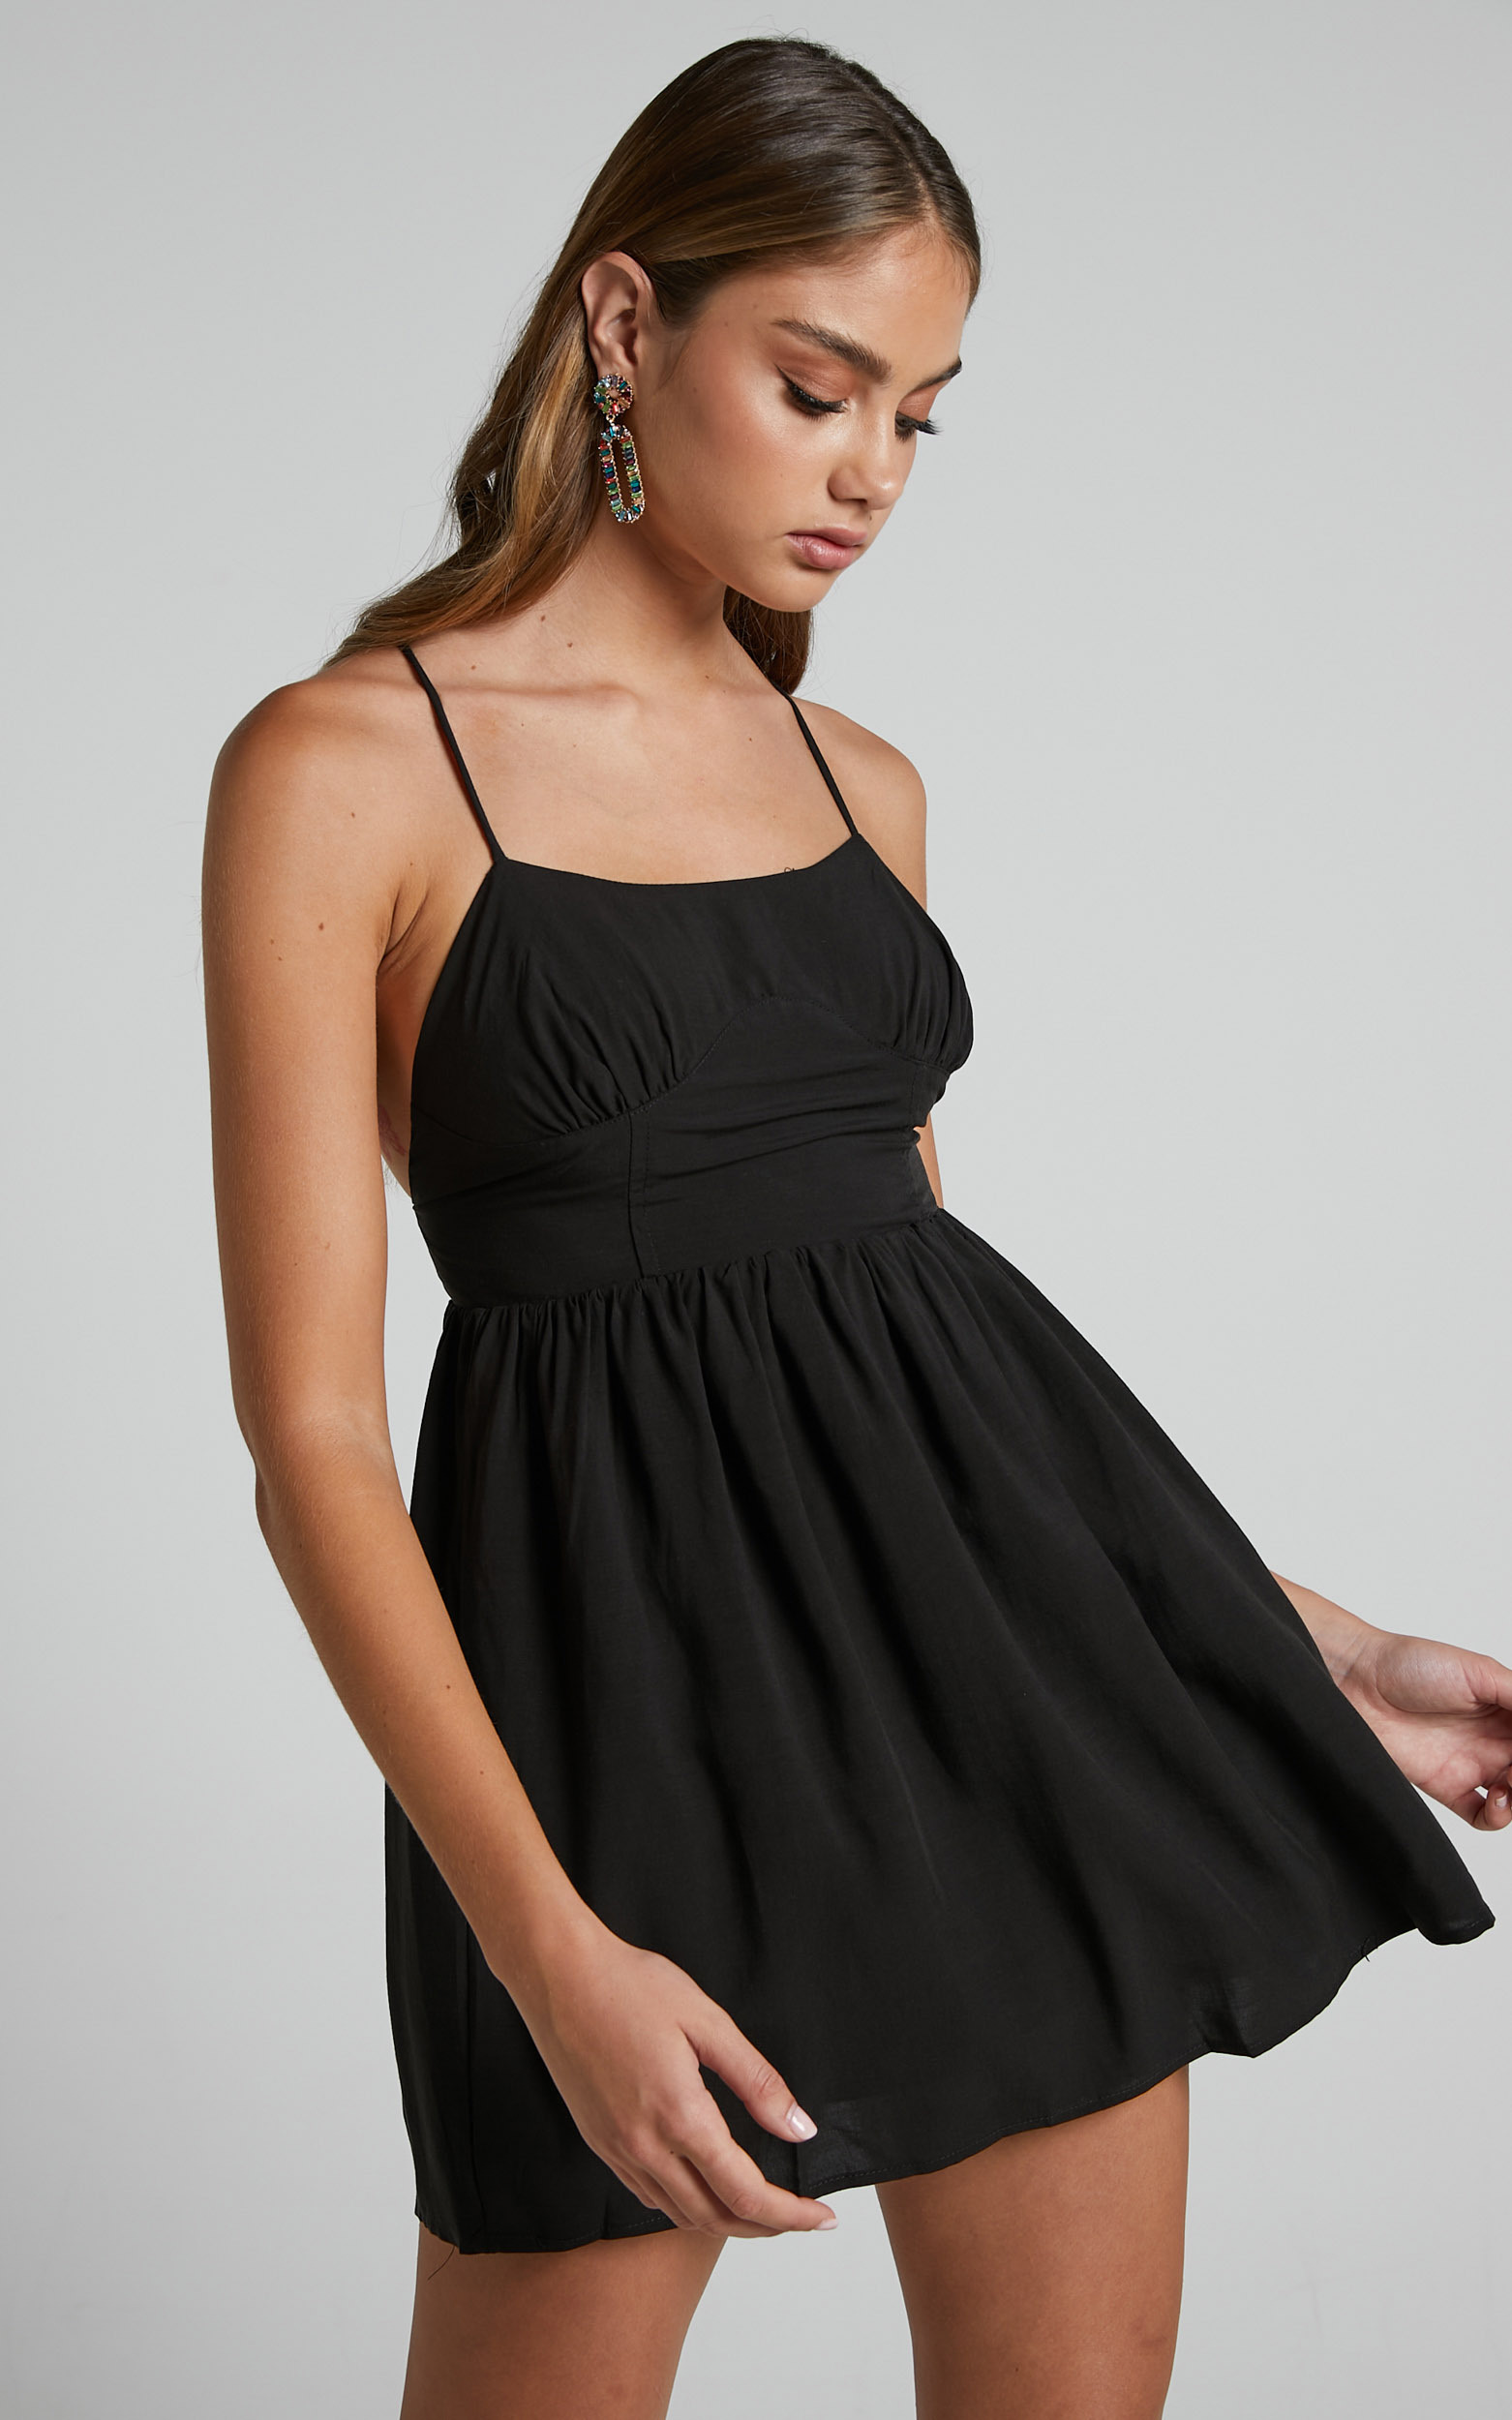 Beilla Mini Dress - Strappy Back Fit and Flare Dress in Black - 04, BLK1, hi-res image number null